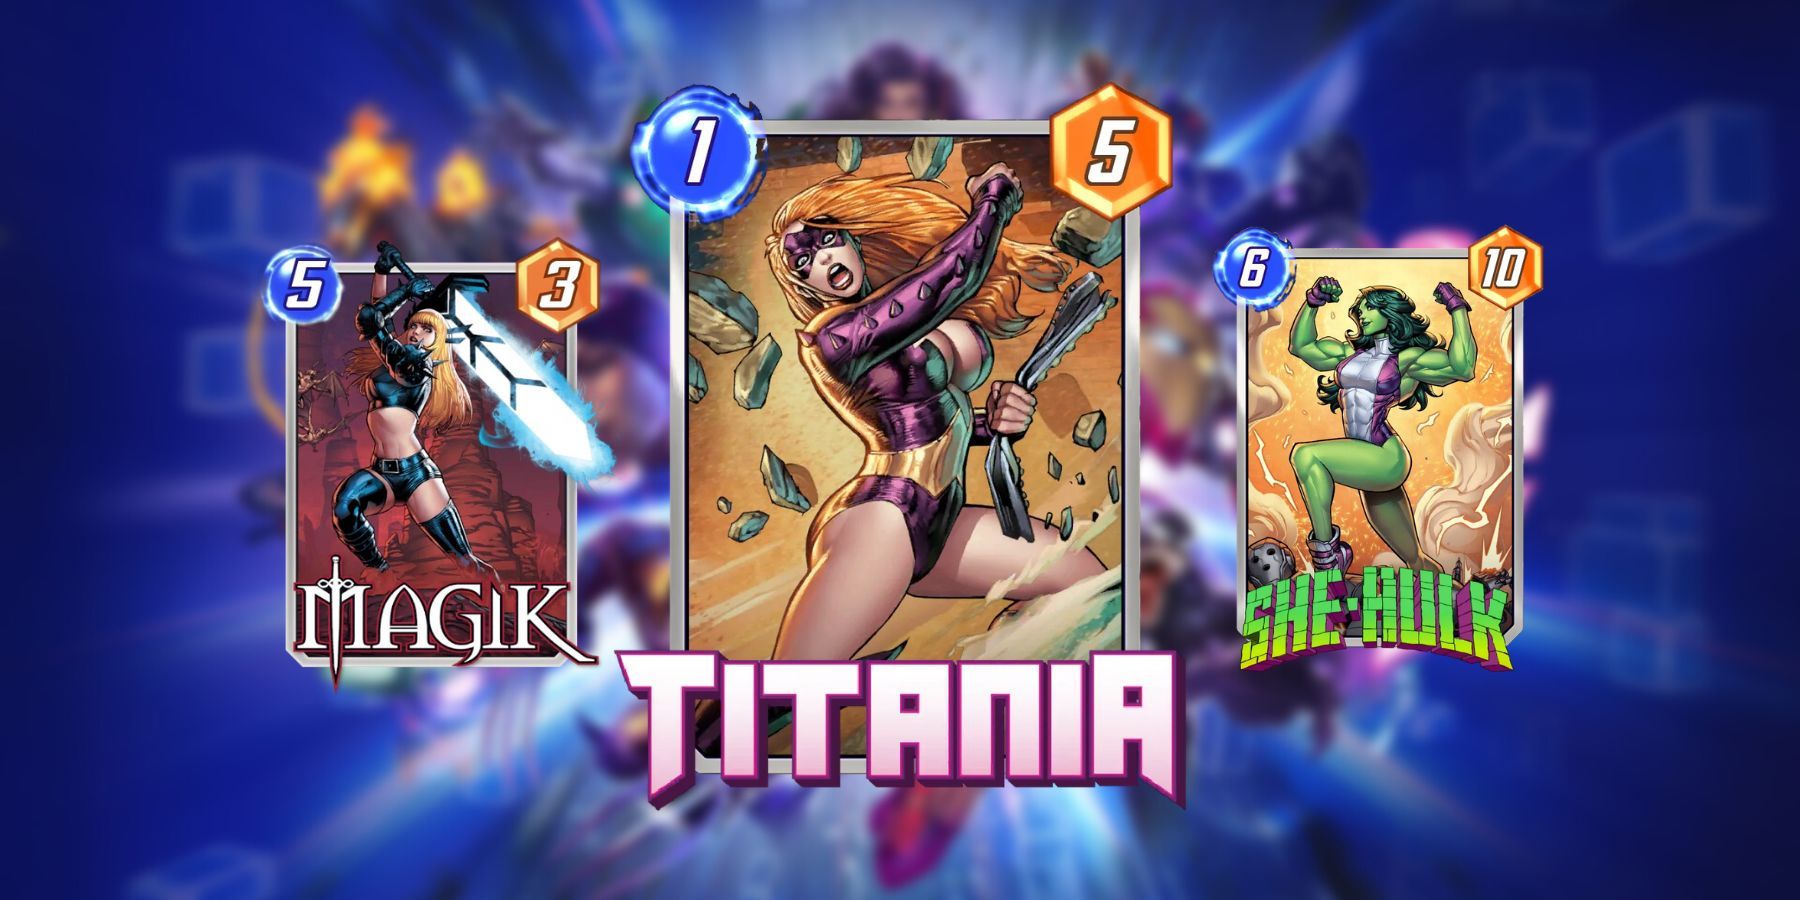 image showing best cards for titania decks in marvel snap.